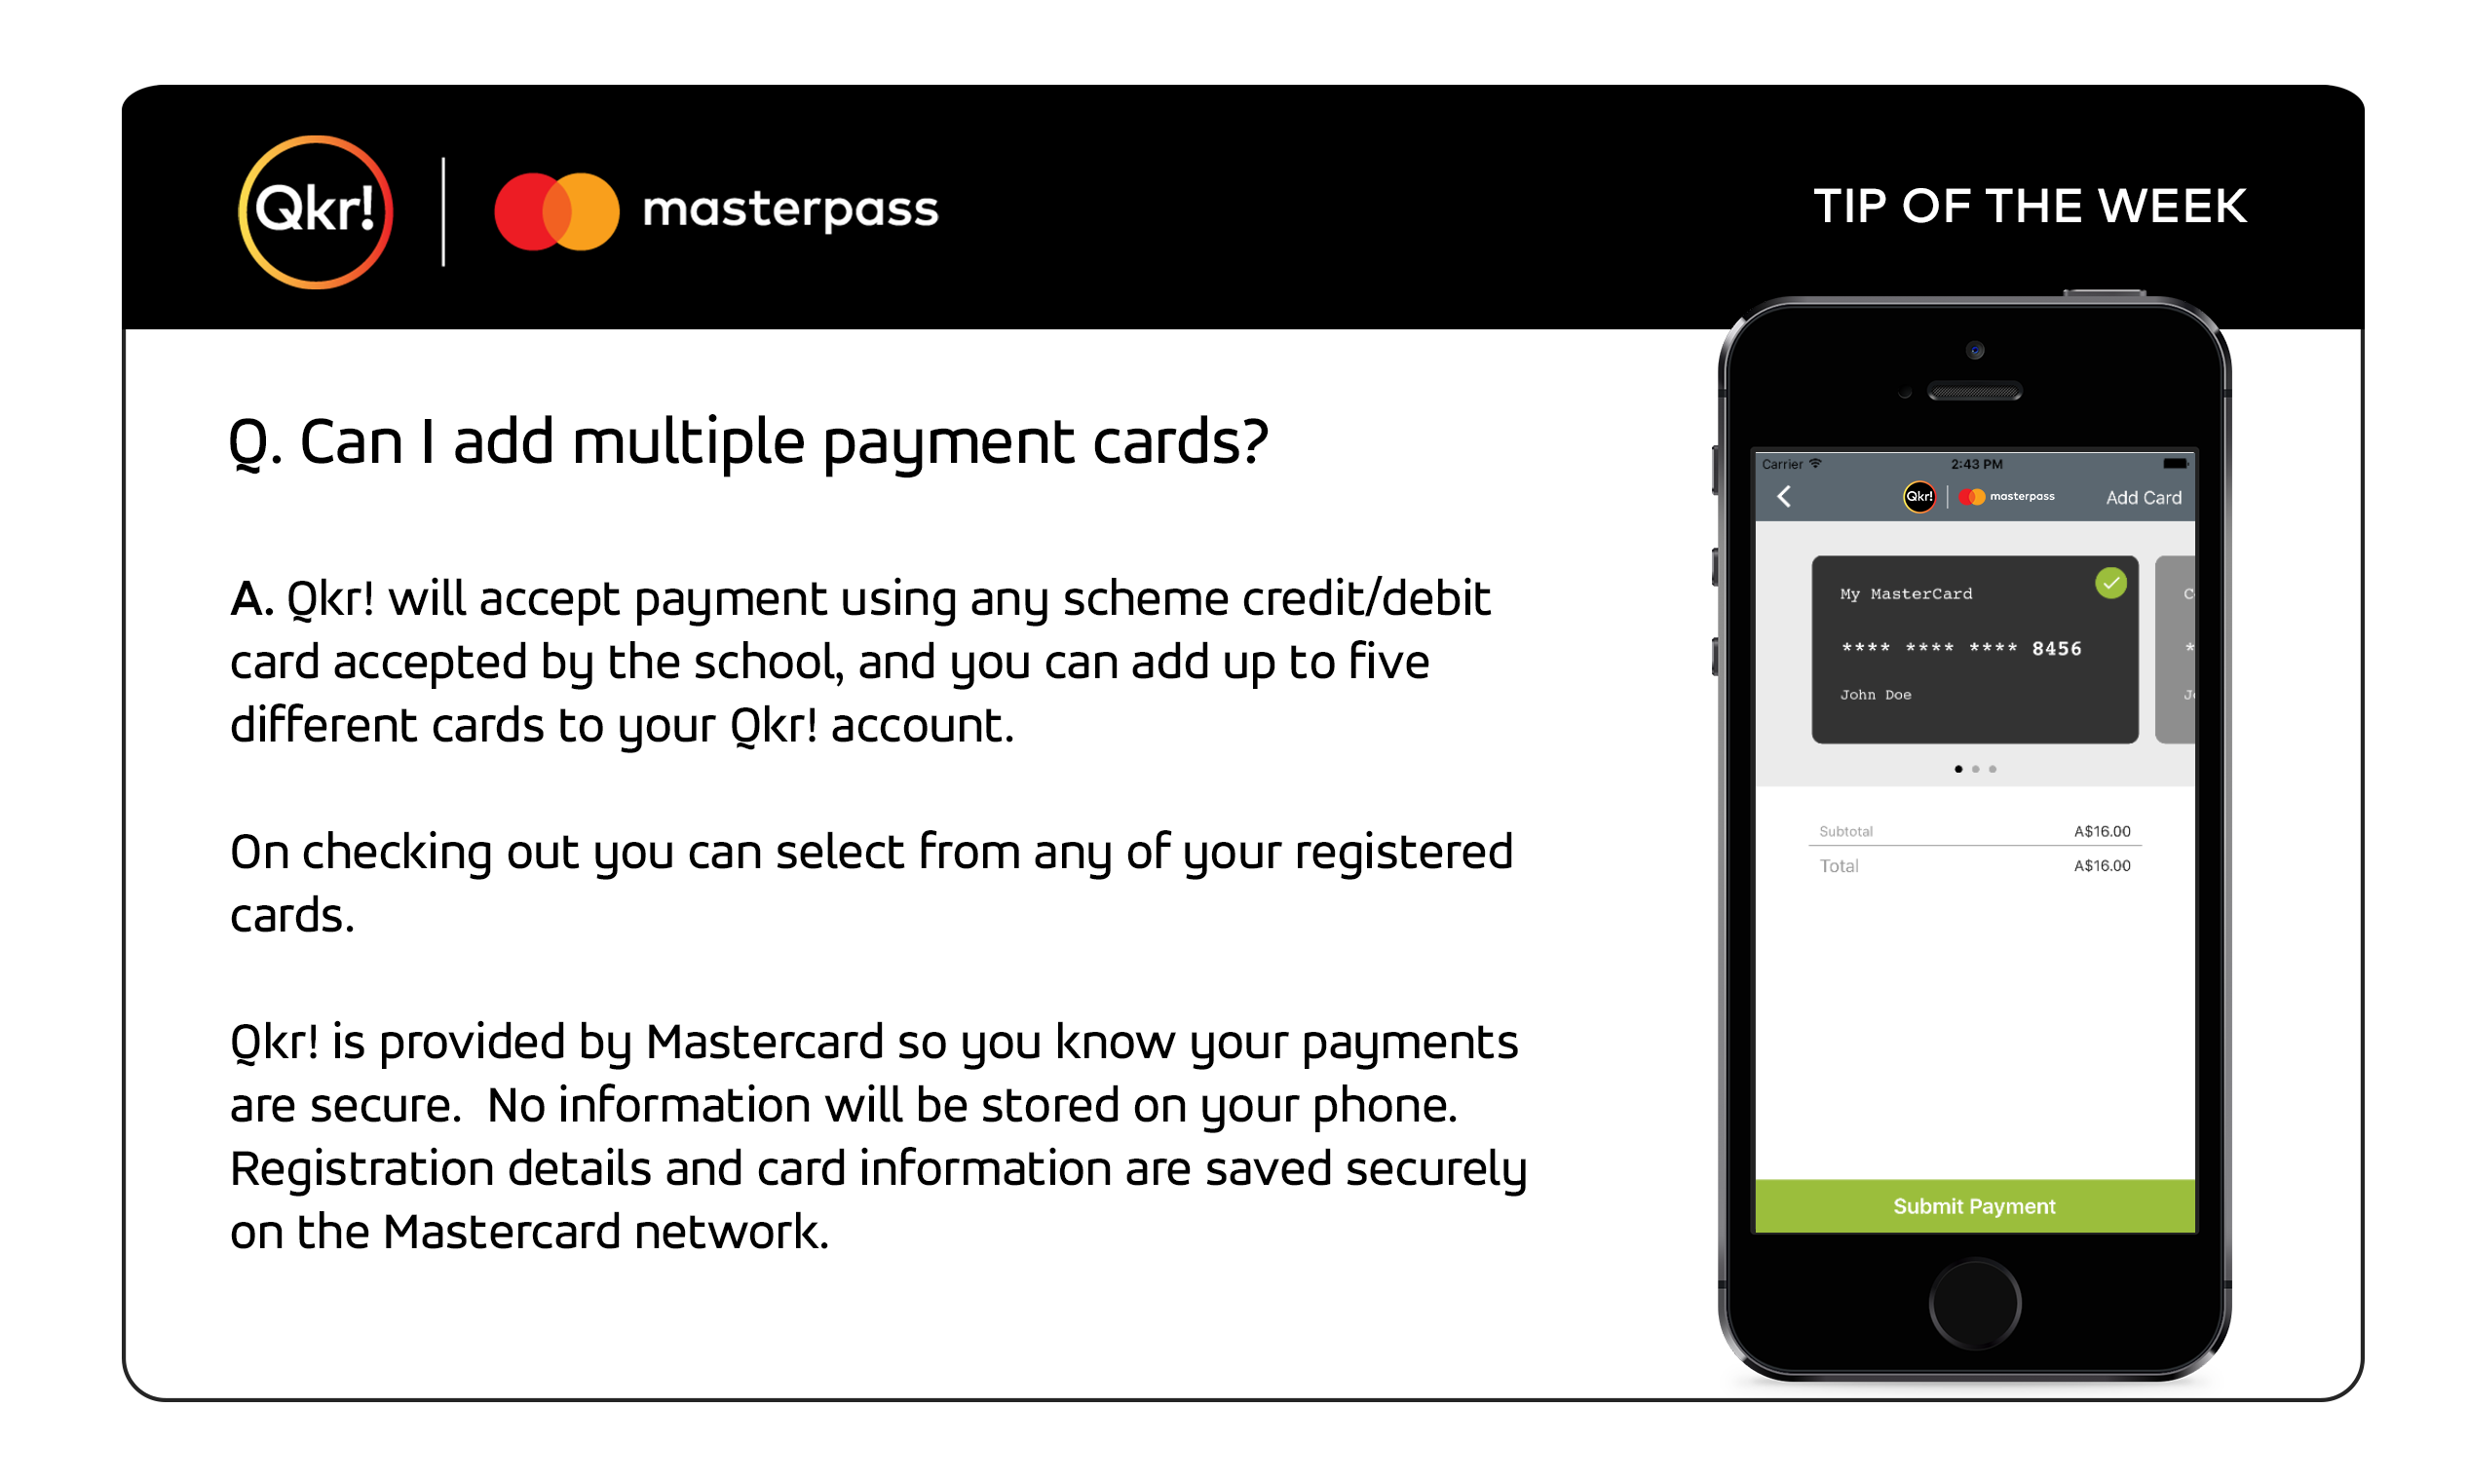 Provides answers to - can I add multiple payment cards?